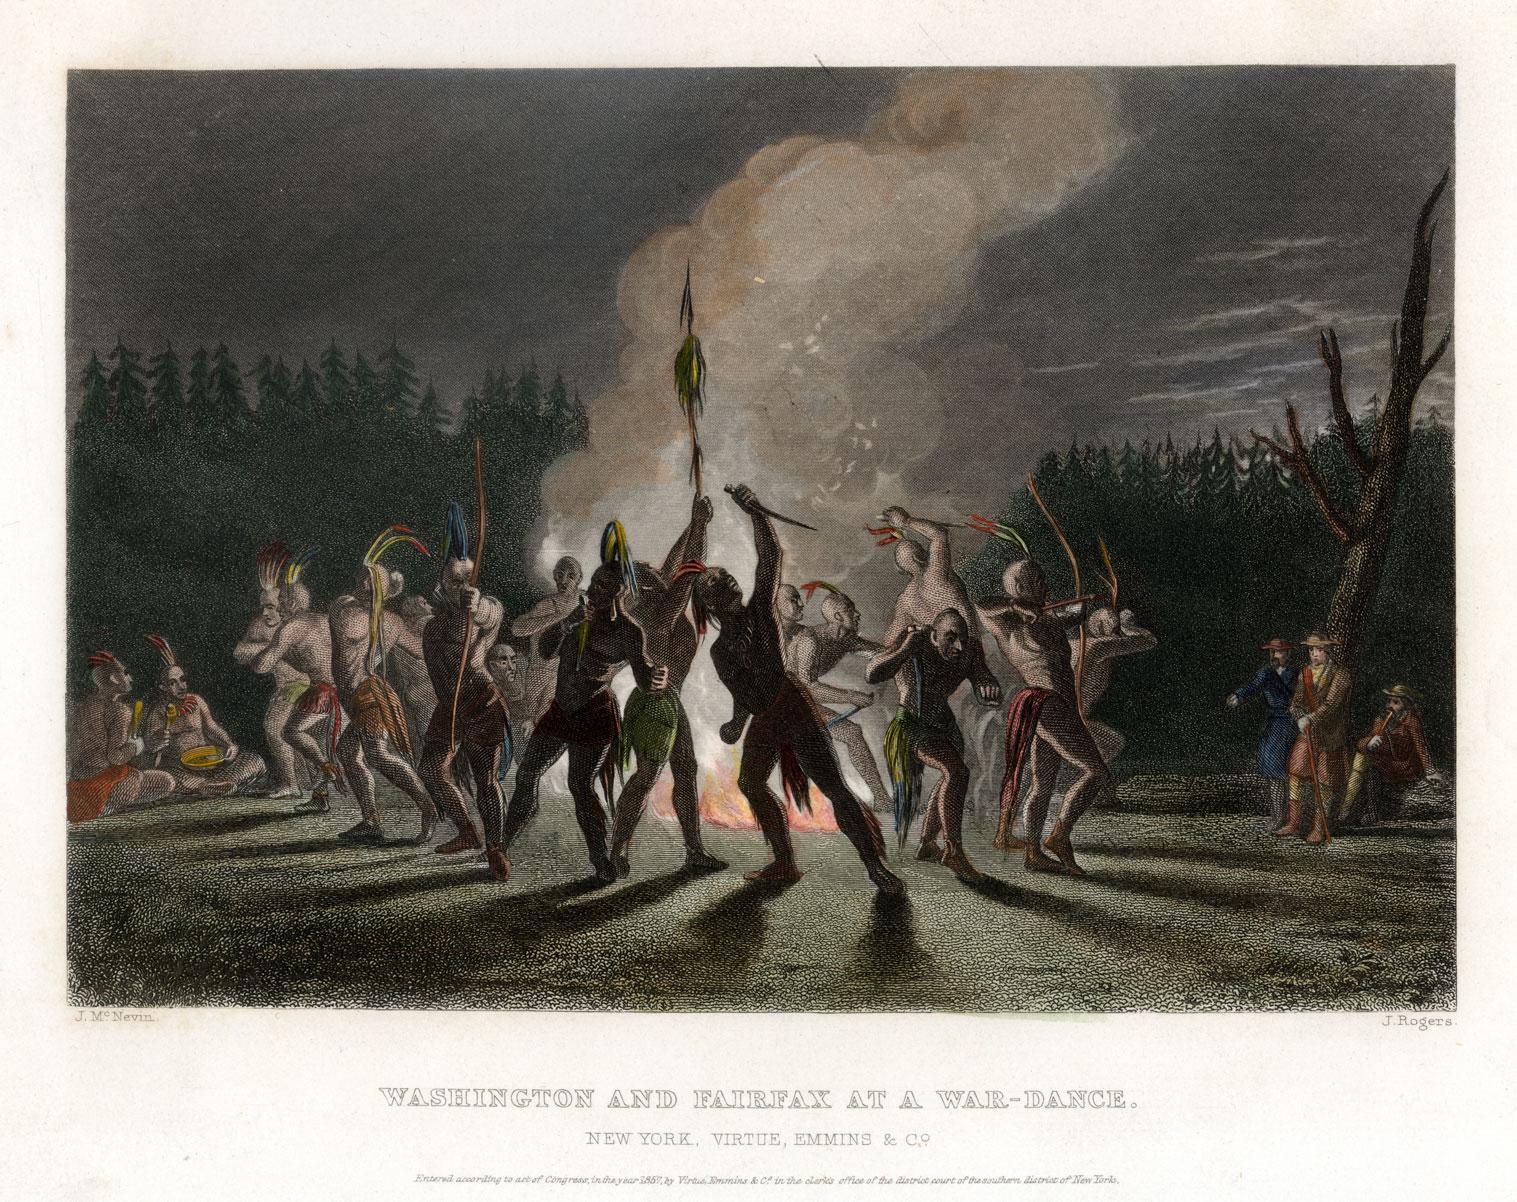 "Washington and Fairfax at a War-Dance," engraved by John Rogers after John McNevin, c 1857. Gift of Mr. and Mrs. Robert B. Gibby, 1984. [WB-3D1]